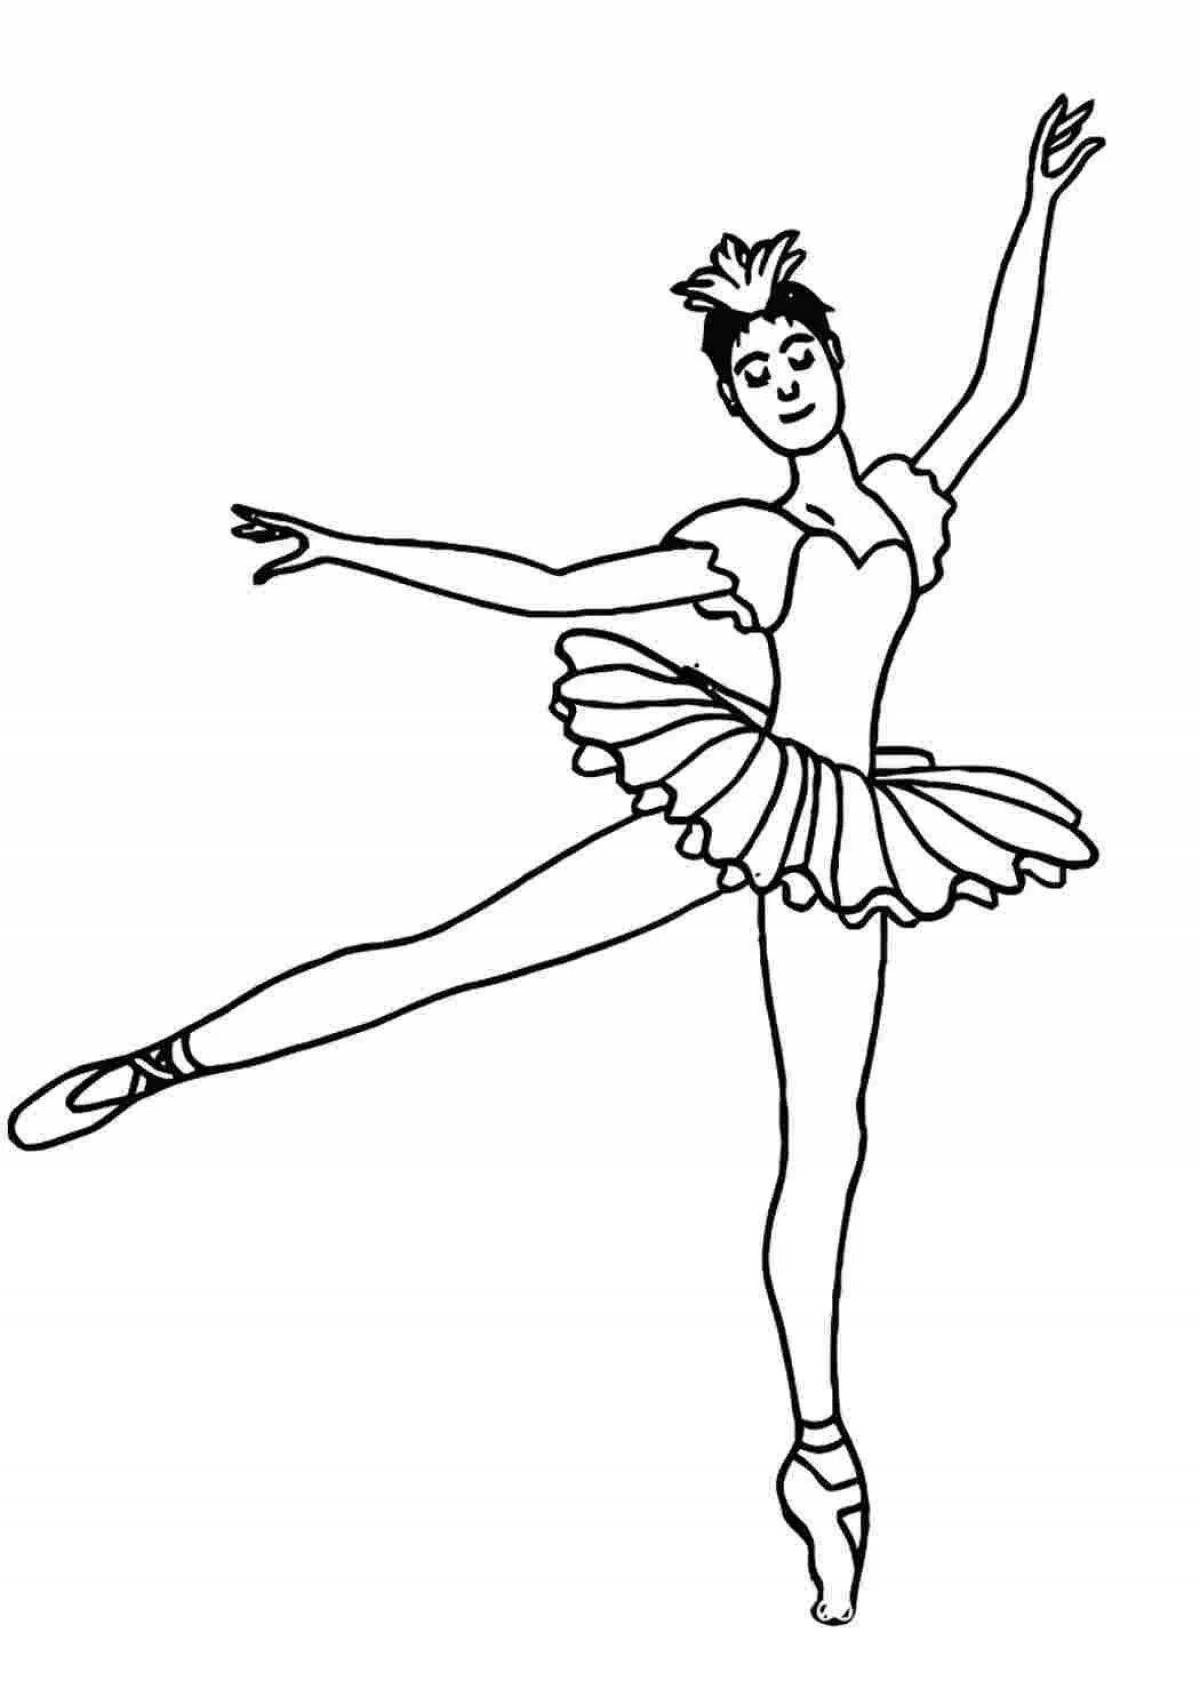 Sweet drawing of a ballerina